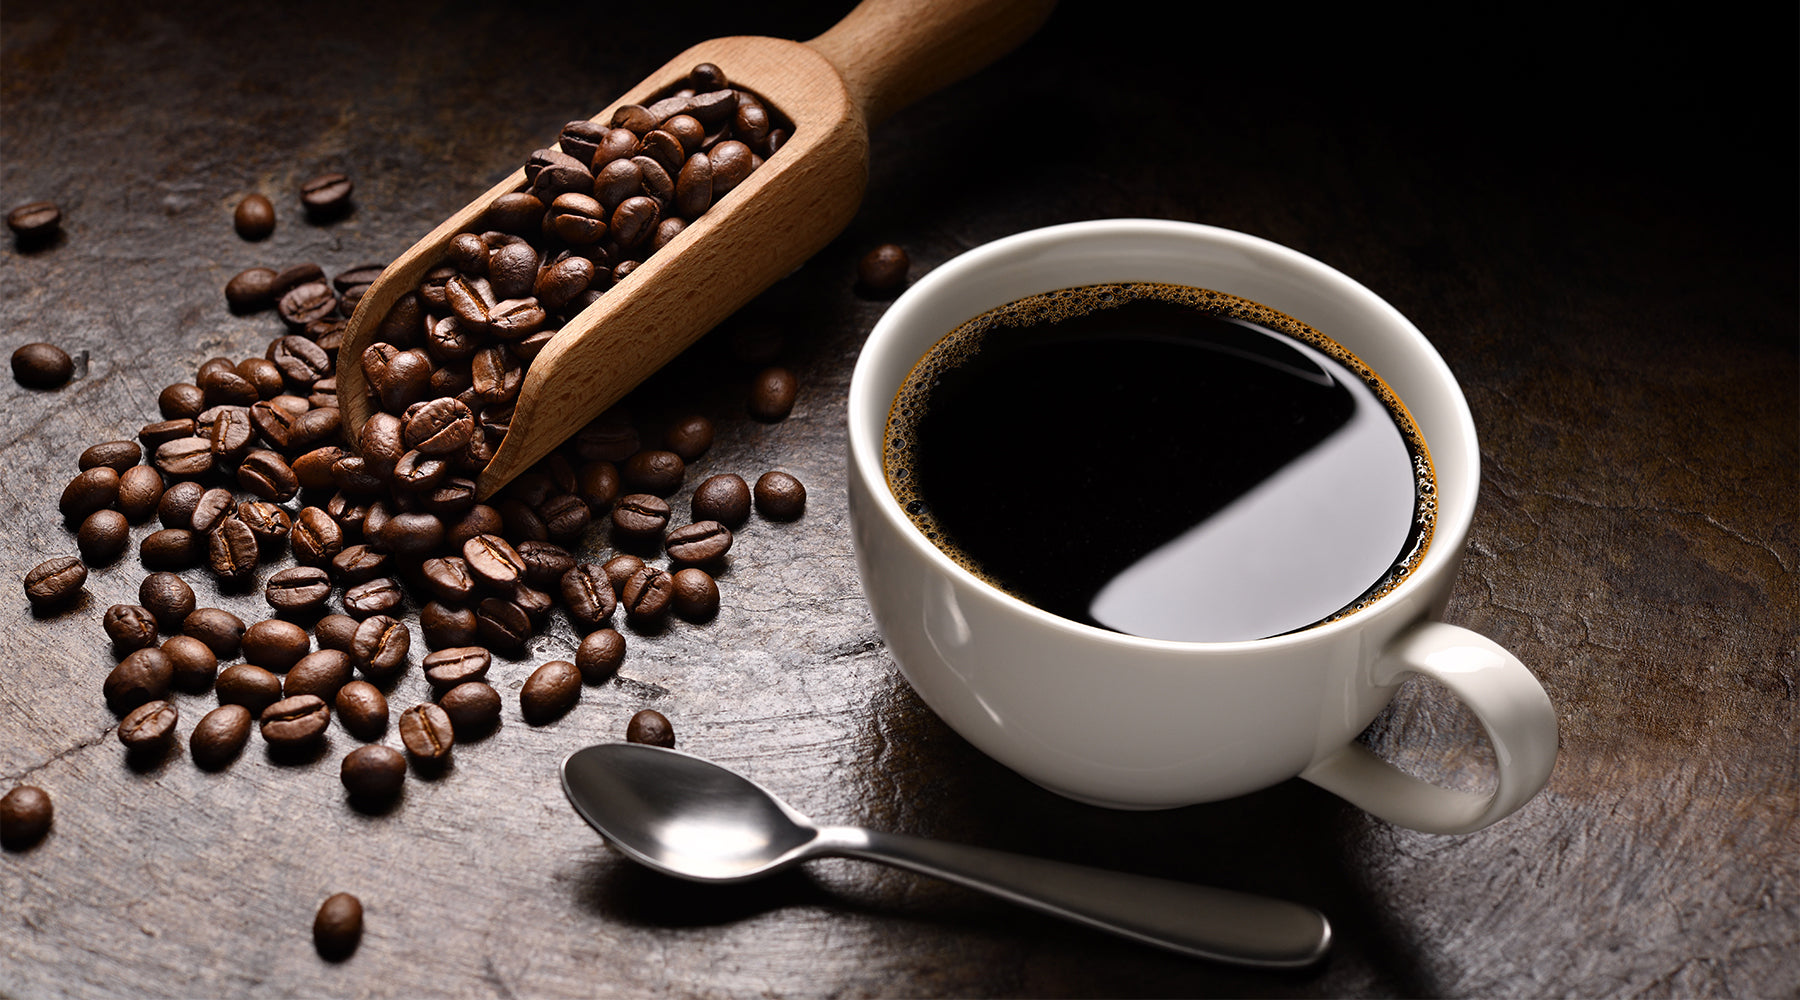 5 Reasons Why You Should NEVER Drink Caffeinated Coffee Again